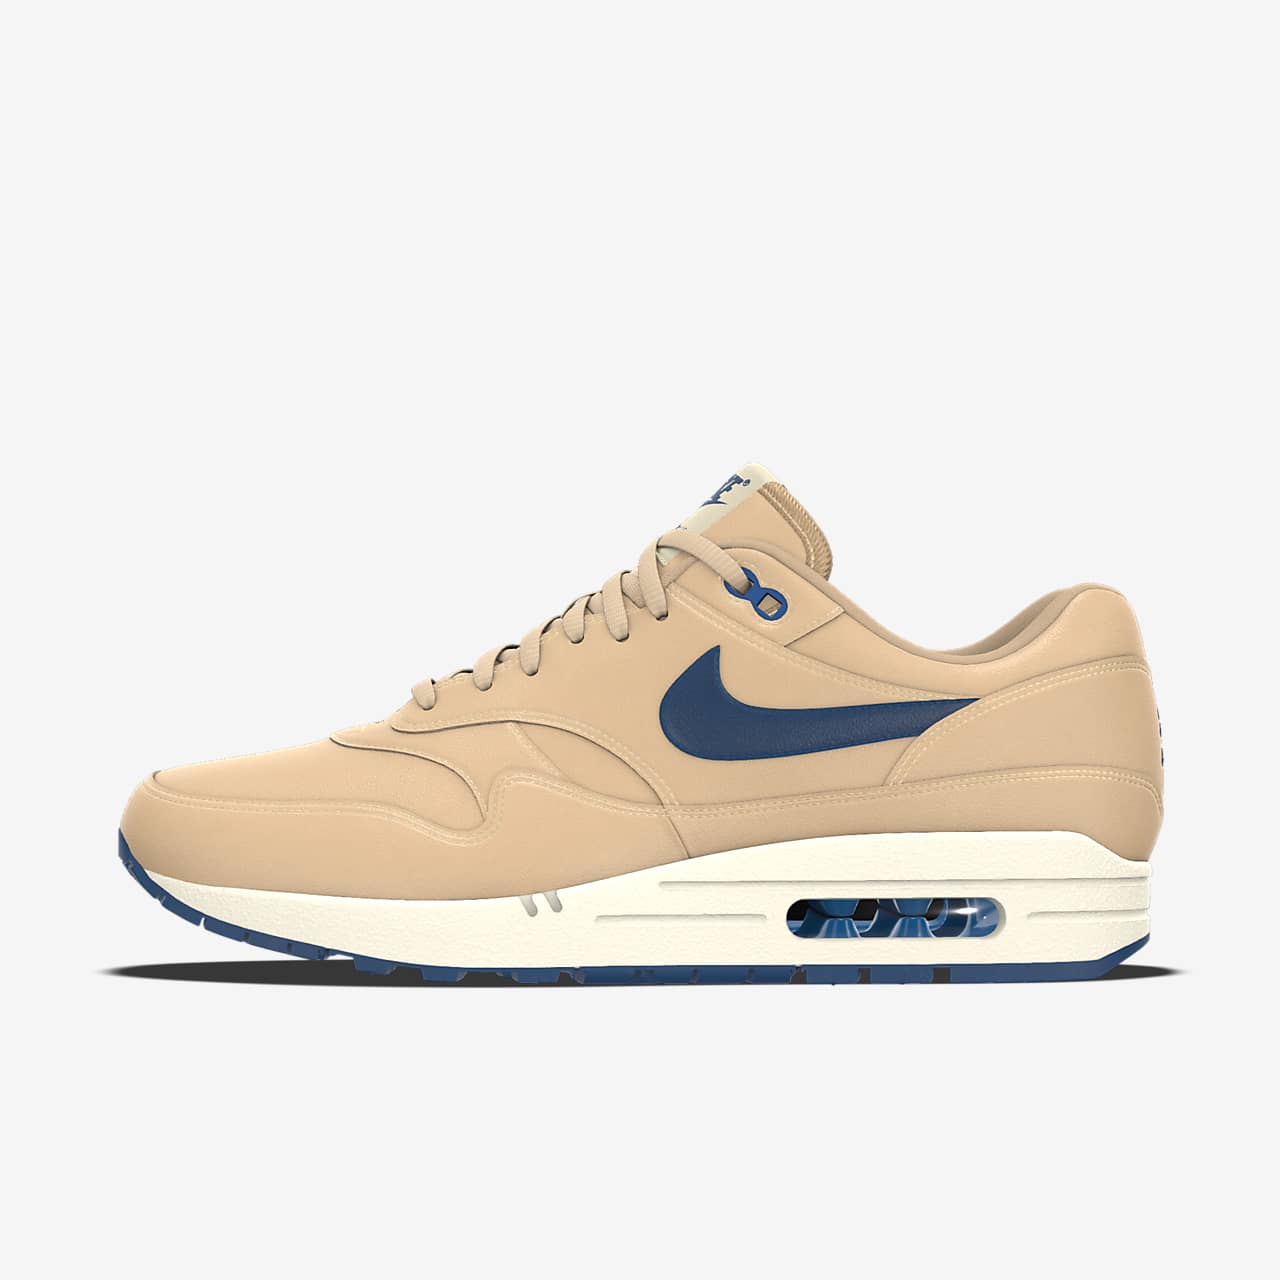 Nike Air Max 1 By You personalisierbarer Schuh